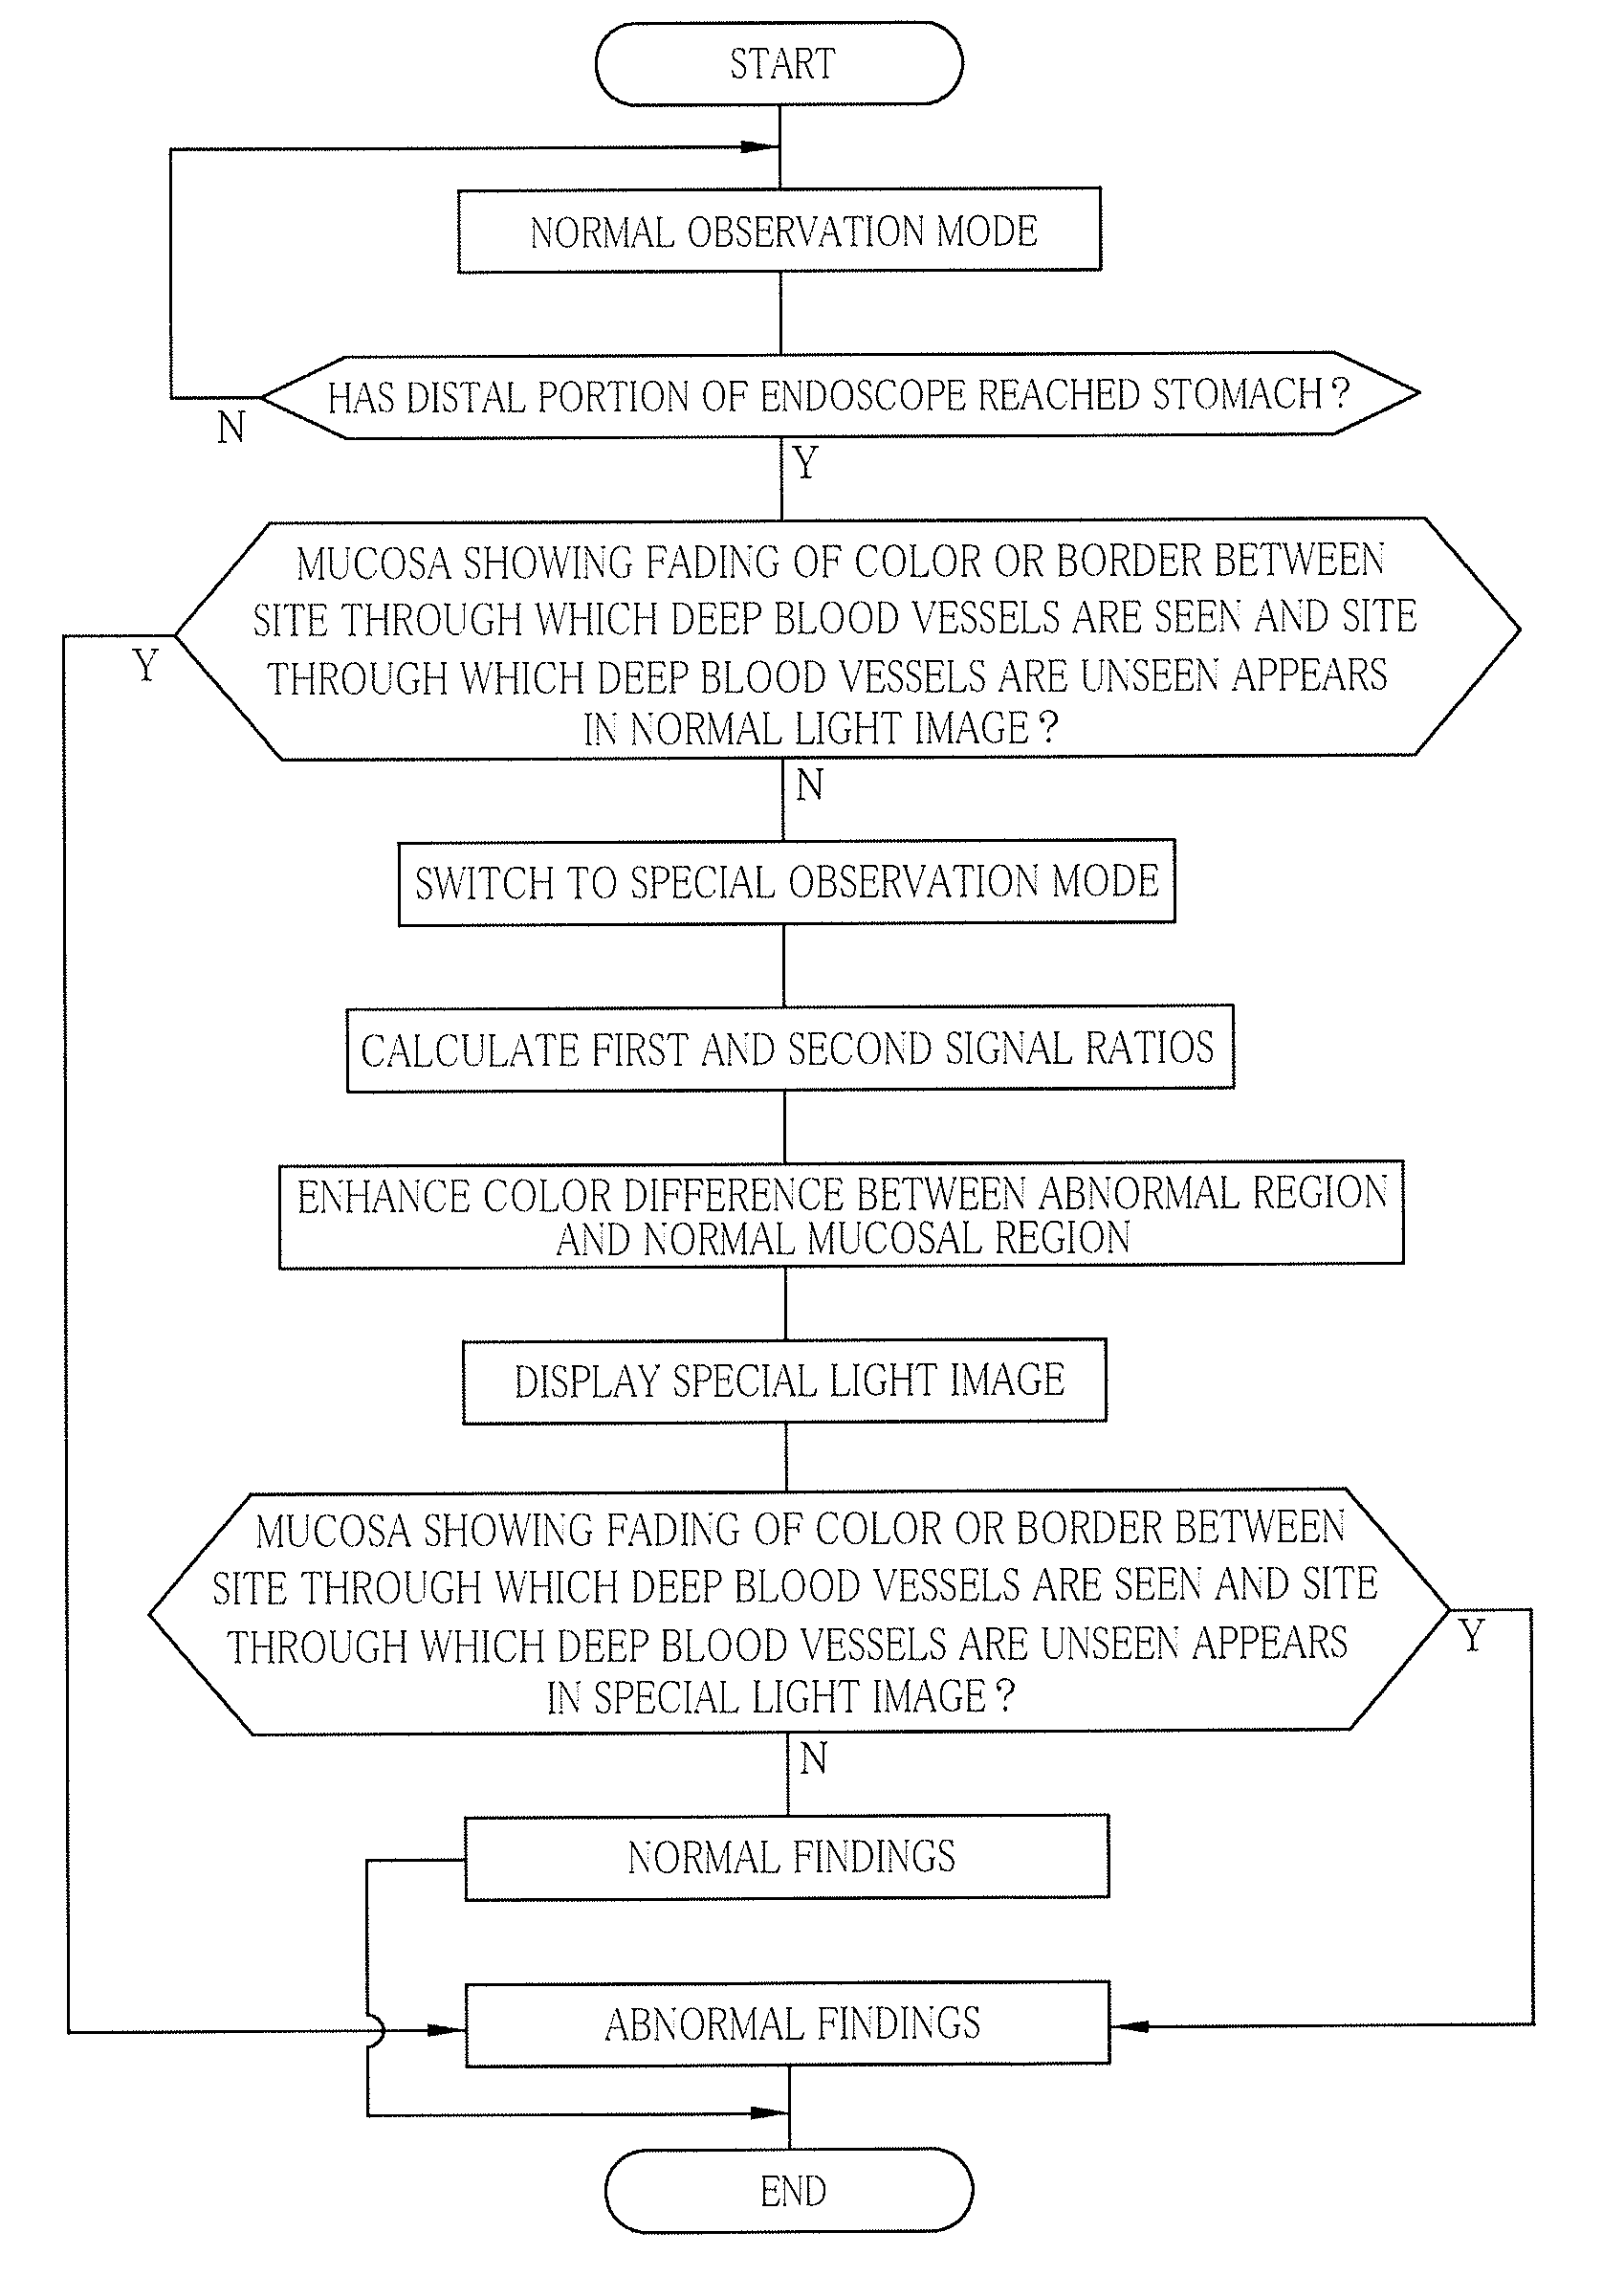 Image processing device and method for operating endoscope system